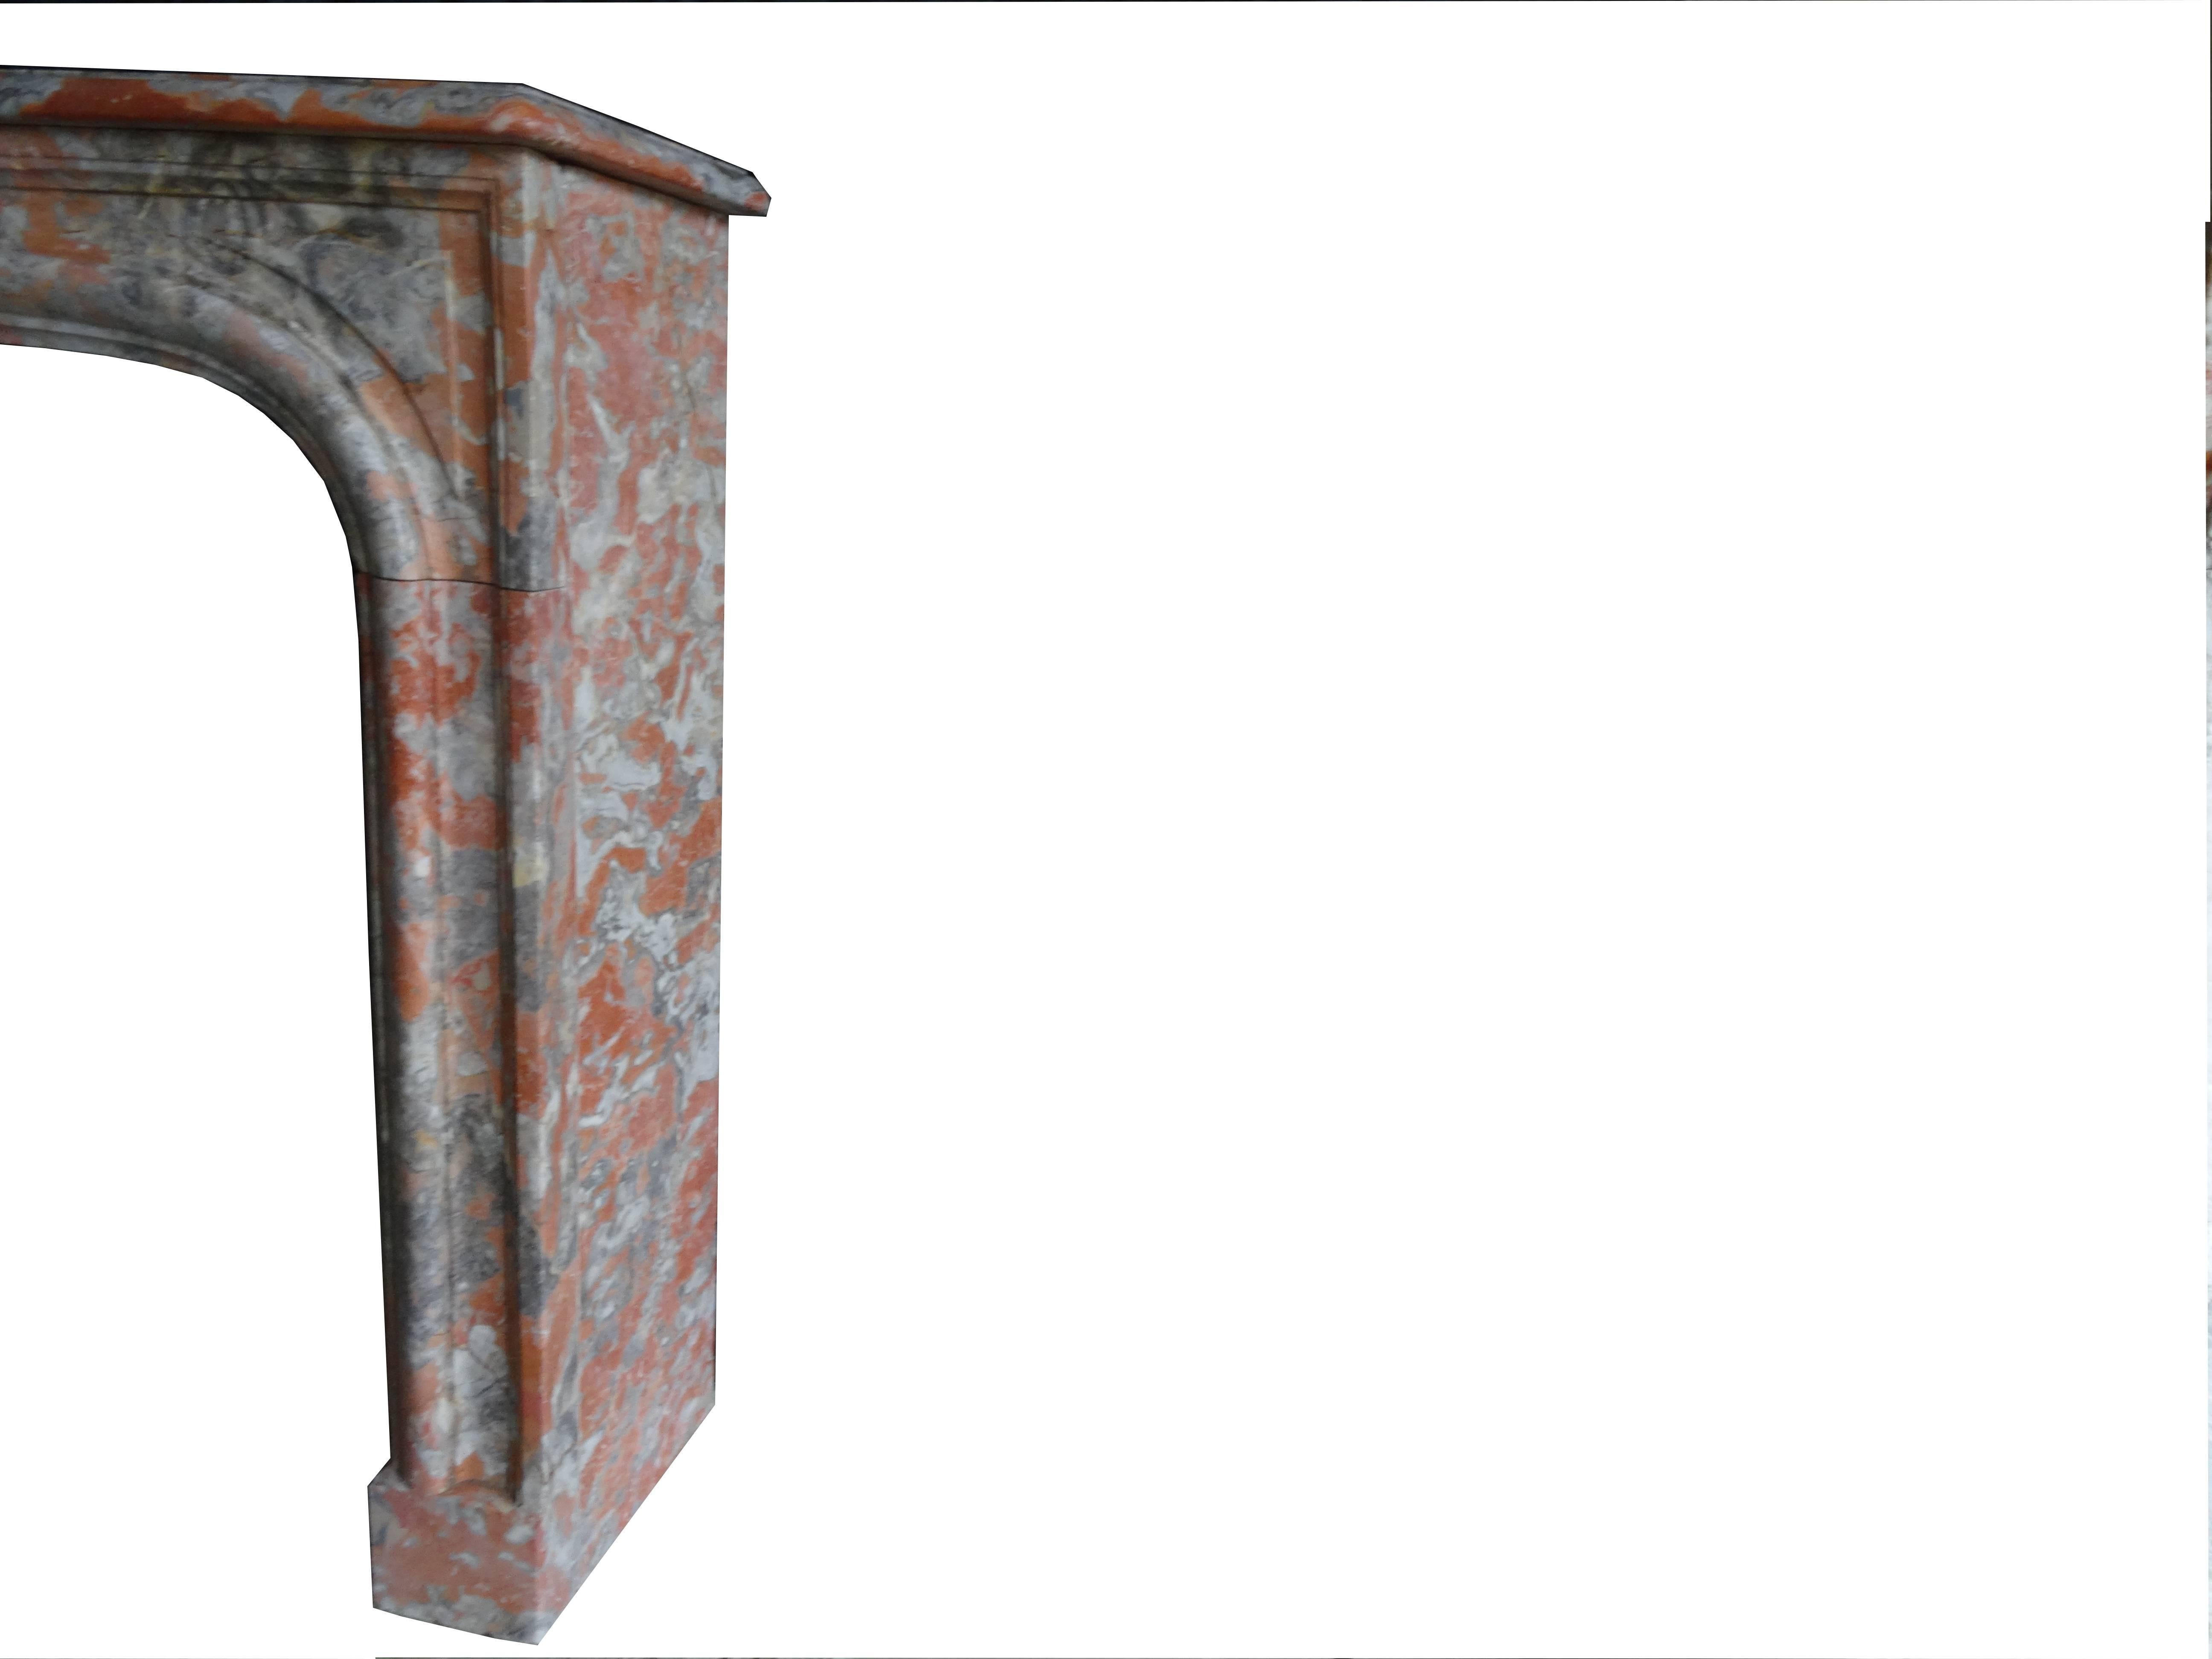 19th century antique Louis XIV style fireplace made of red incarnat marble. This marble is quite similar to the red Languedoc marble, but has a more light colored hue with contrasting elements. The tablet has a beautiful character and patine.